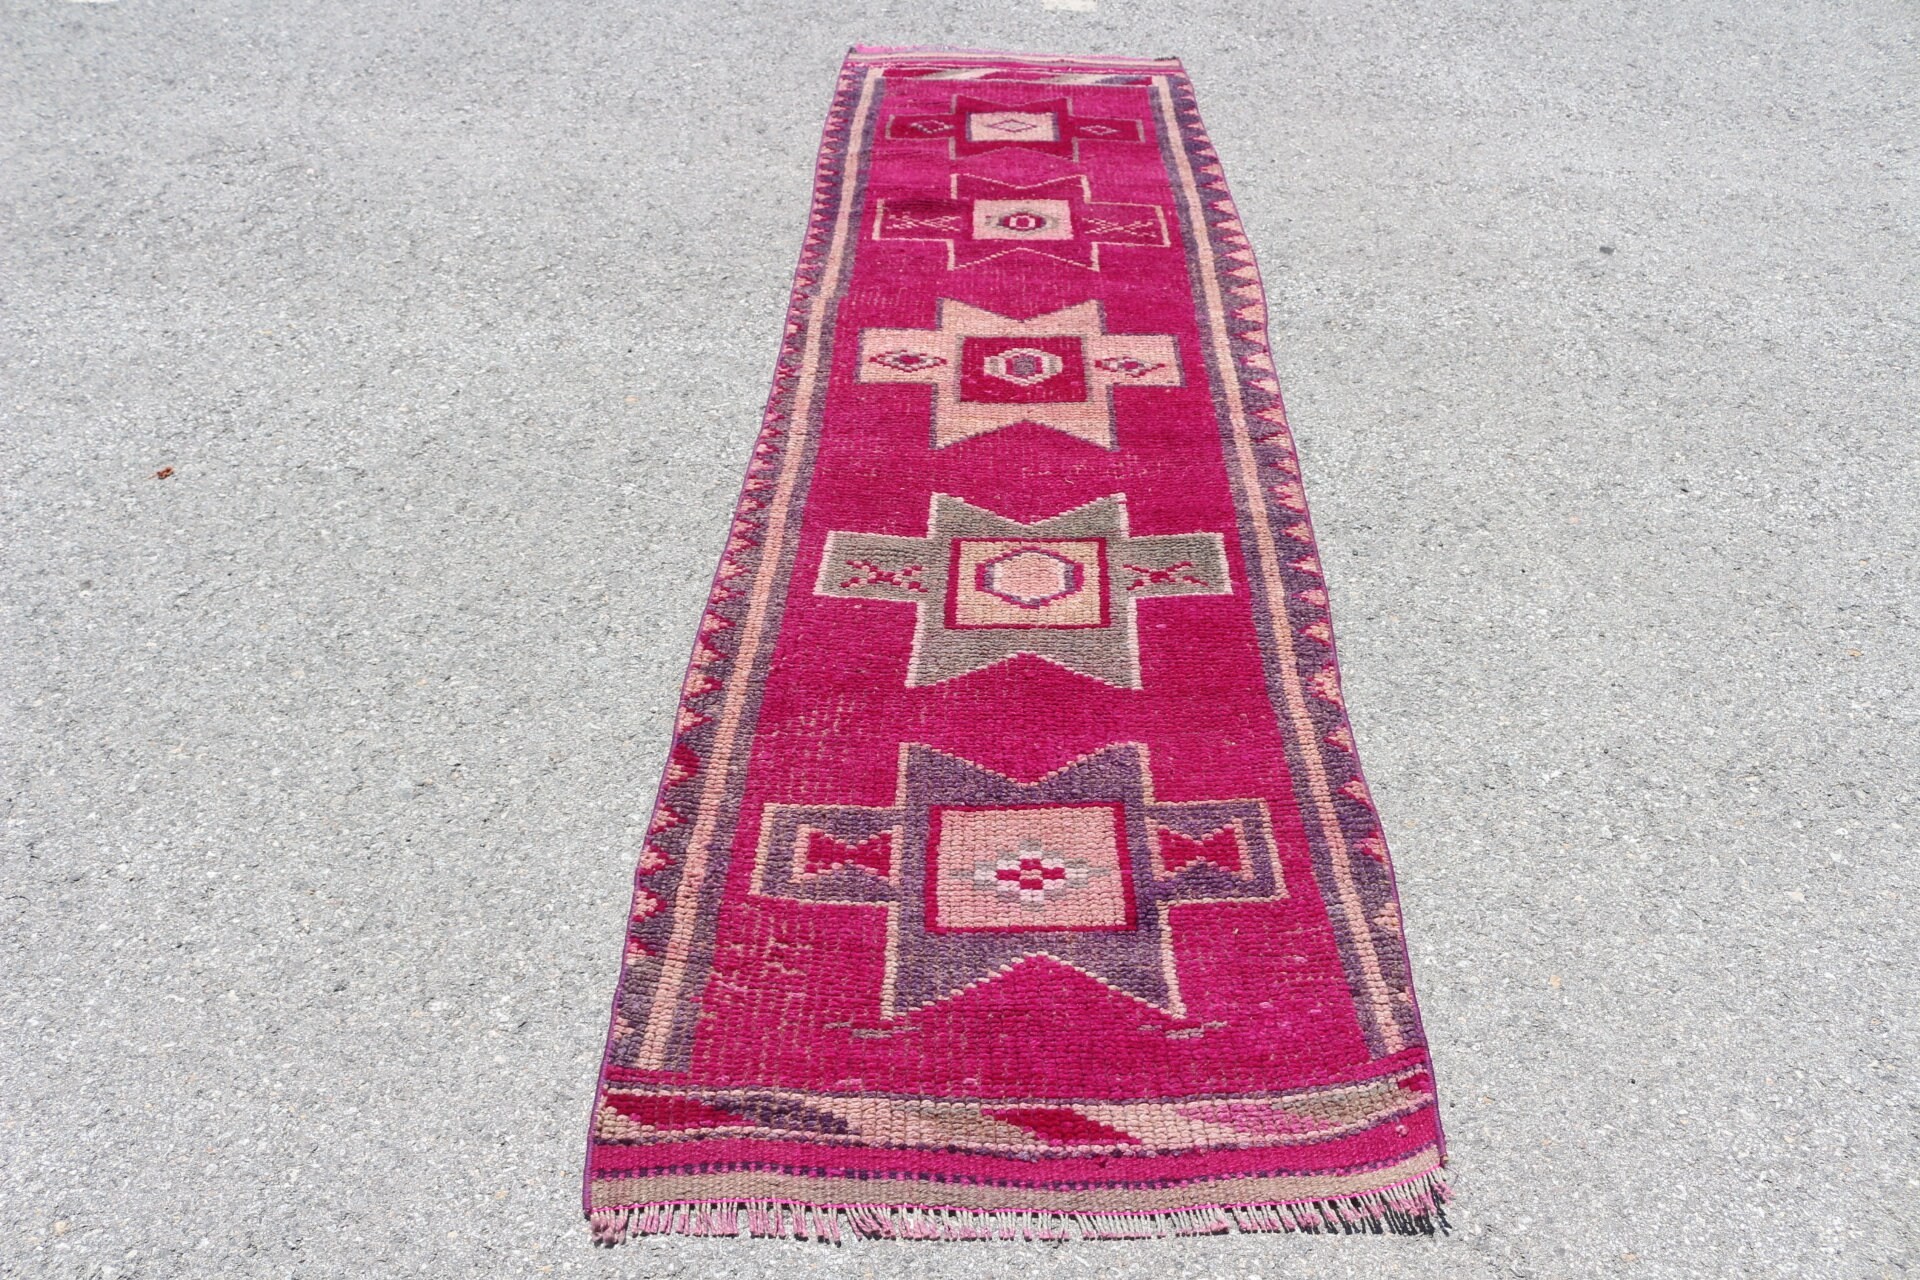 Stair Rug, 2.7x9.5 ft Runner Rugs, Vintage Rugs, Kitchen Rugs, Art Rugs, Turkish Rug, Antique Rugs, Home Decor Rugs, Pink Antique Rug